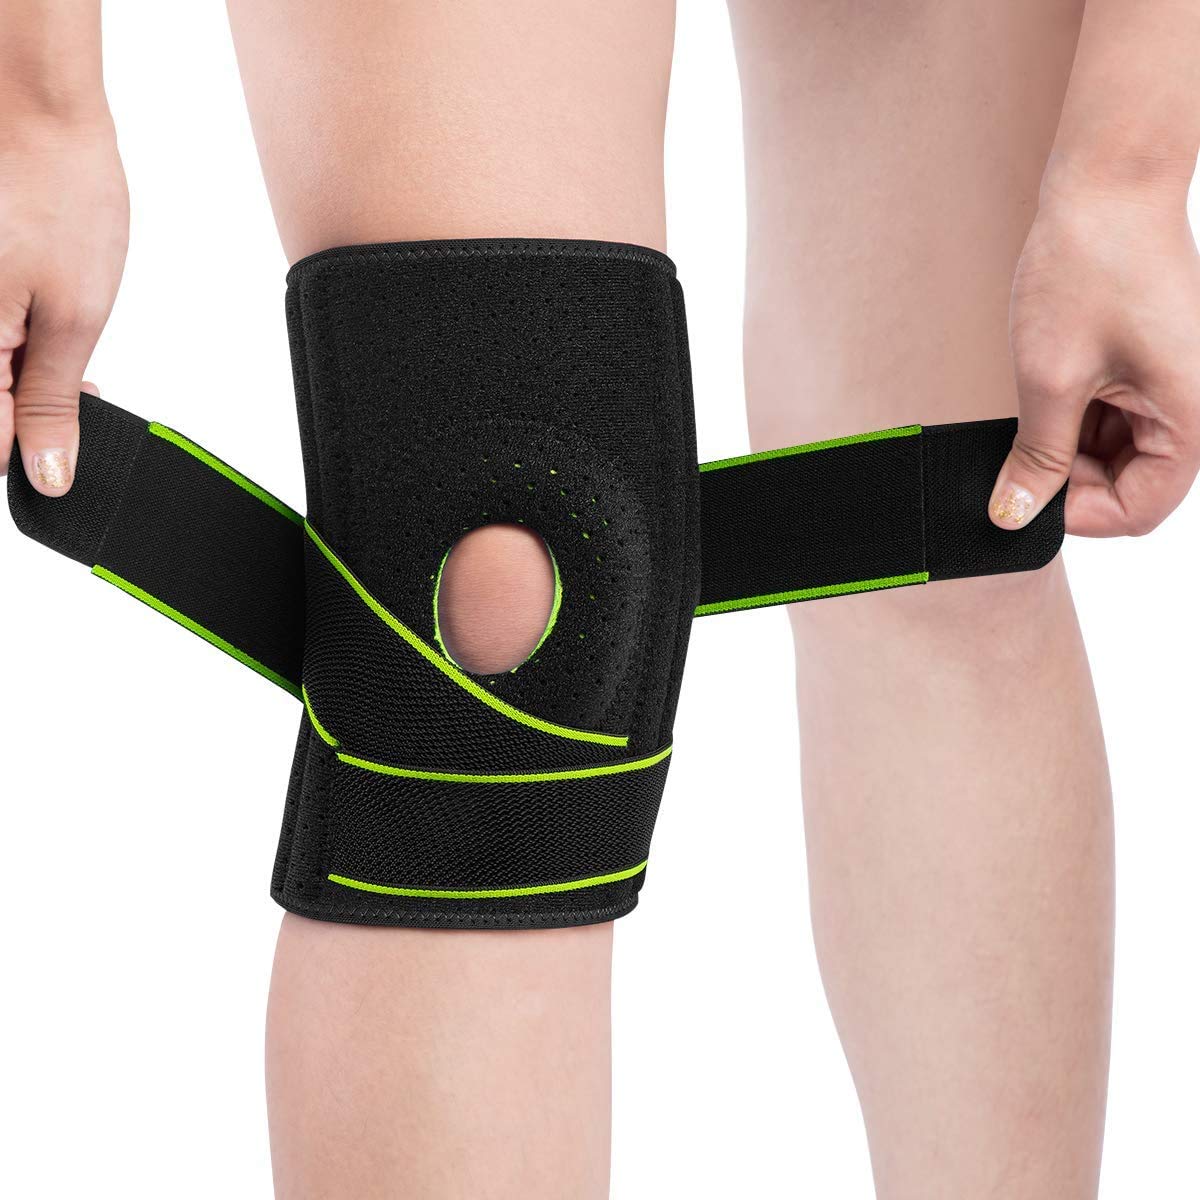 Knee Sleeve for Arthritis Pain and Support,Knee Brace Compression for Men Women with Patella Gel Pads & Side Stabilizers,Medical Grade Knee Pads for,Meniscus Tear,ACL,Arthritis,Joint Pain Relief